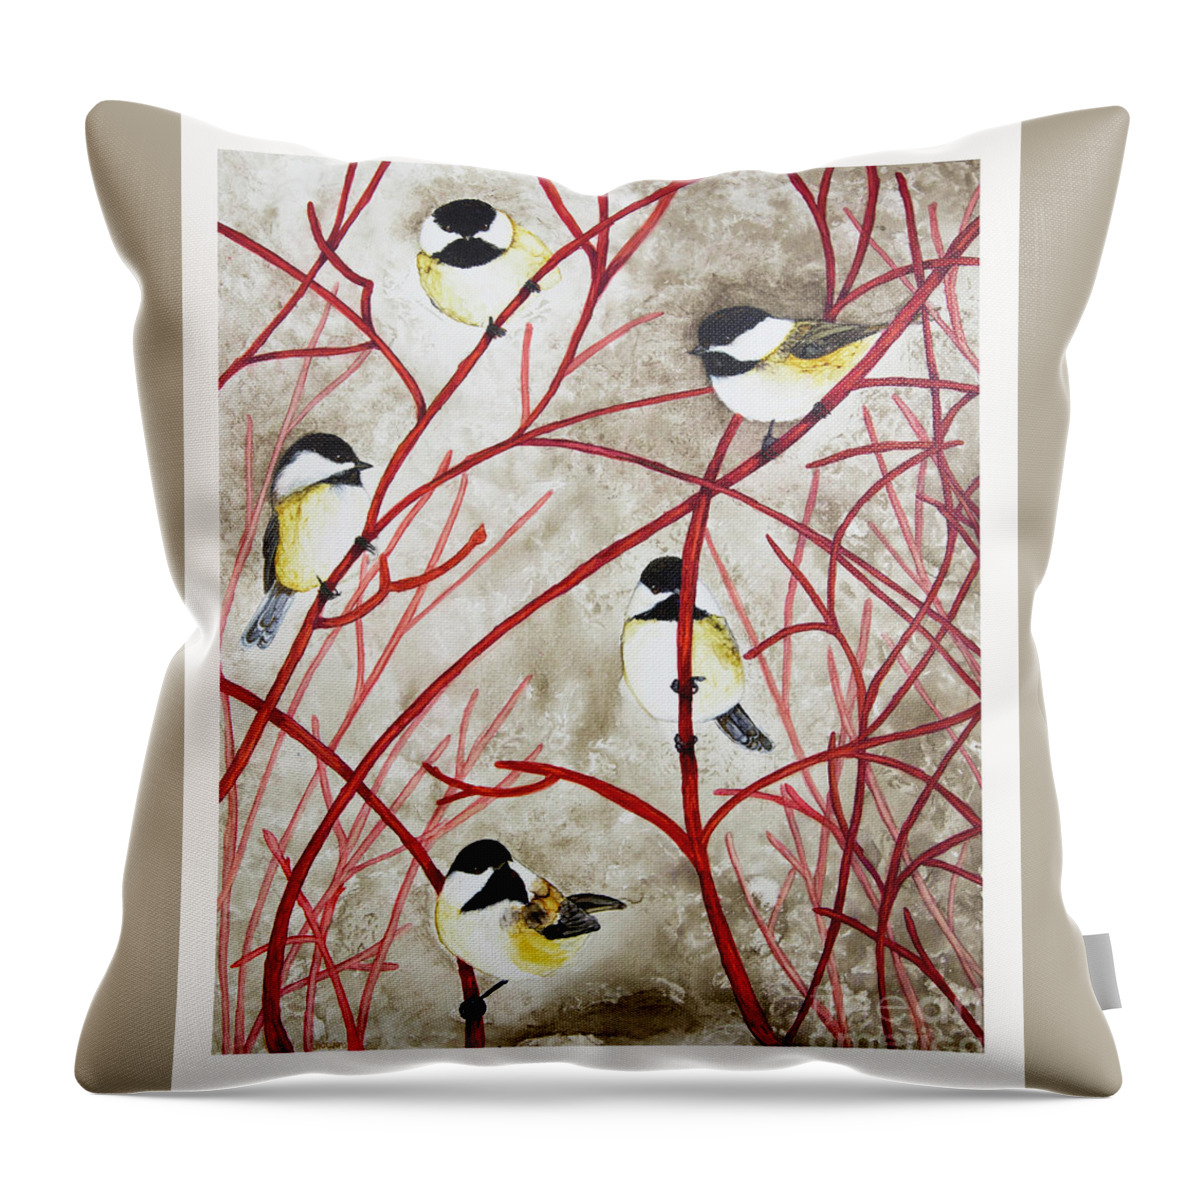 Chickadee Throw Pillow featuring the painting Happiness Times 5 by Jan Killian